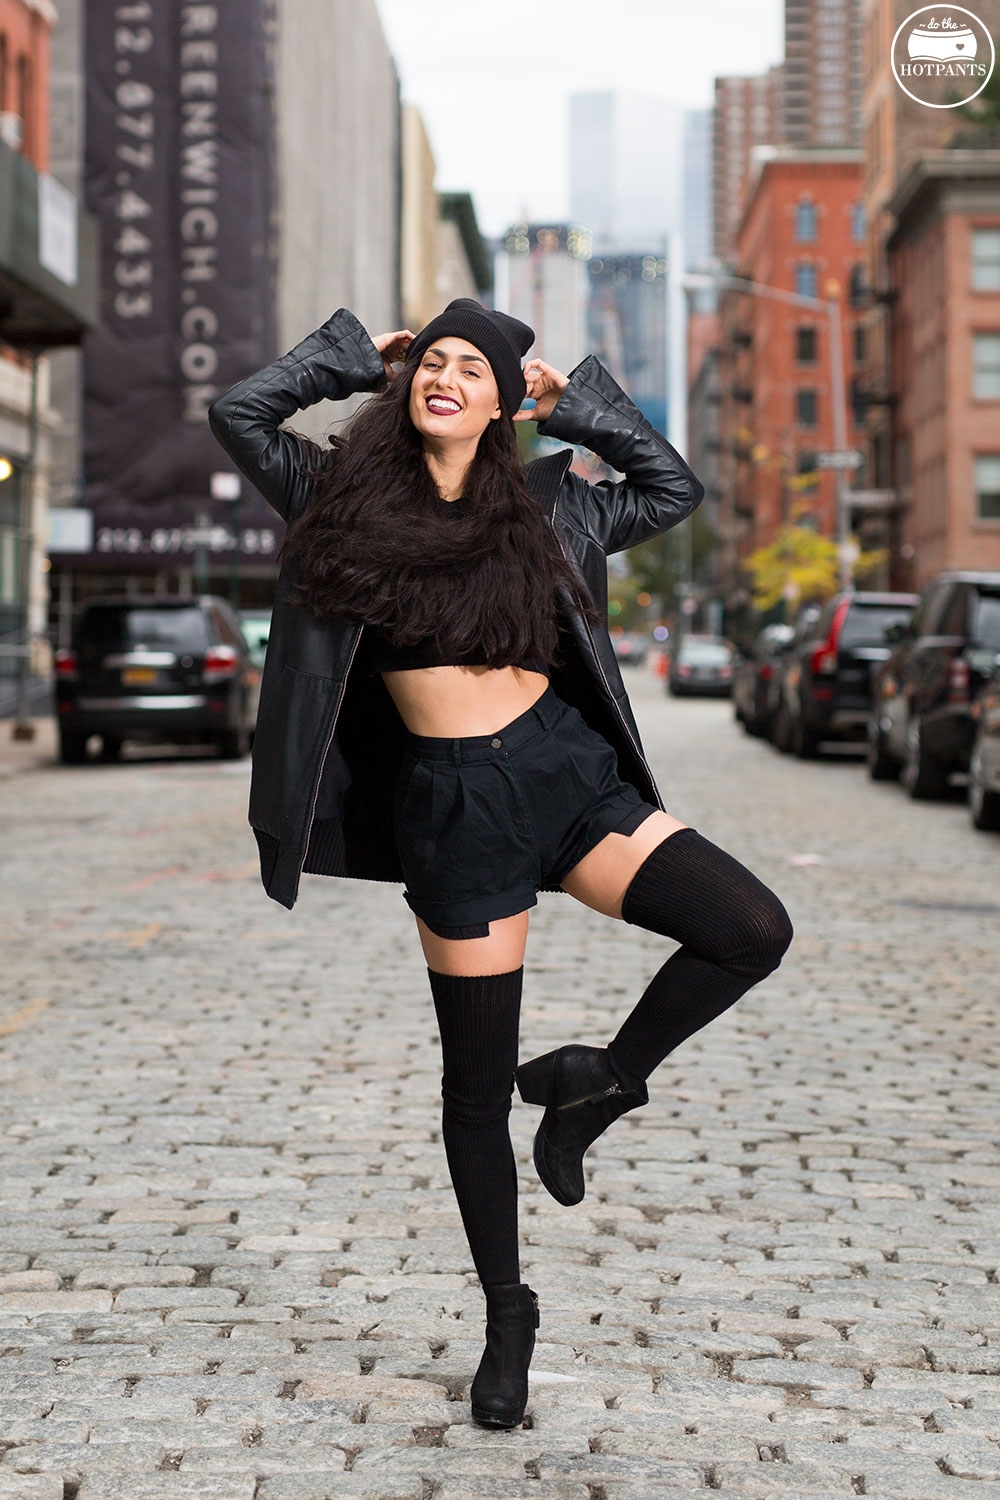 Do The Hotpants Dana Suchow Goth Outfit Black Beanie Thigh High Socks Crop Top Black Leather Jacket_M8A0320